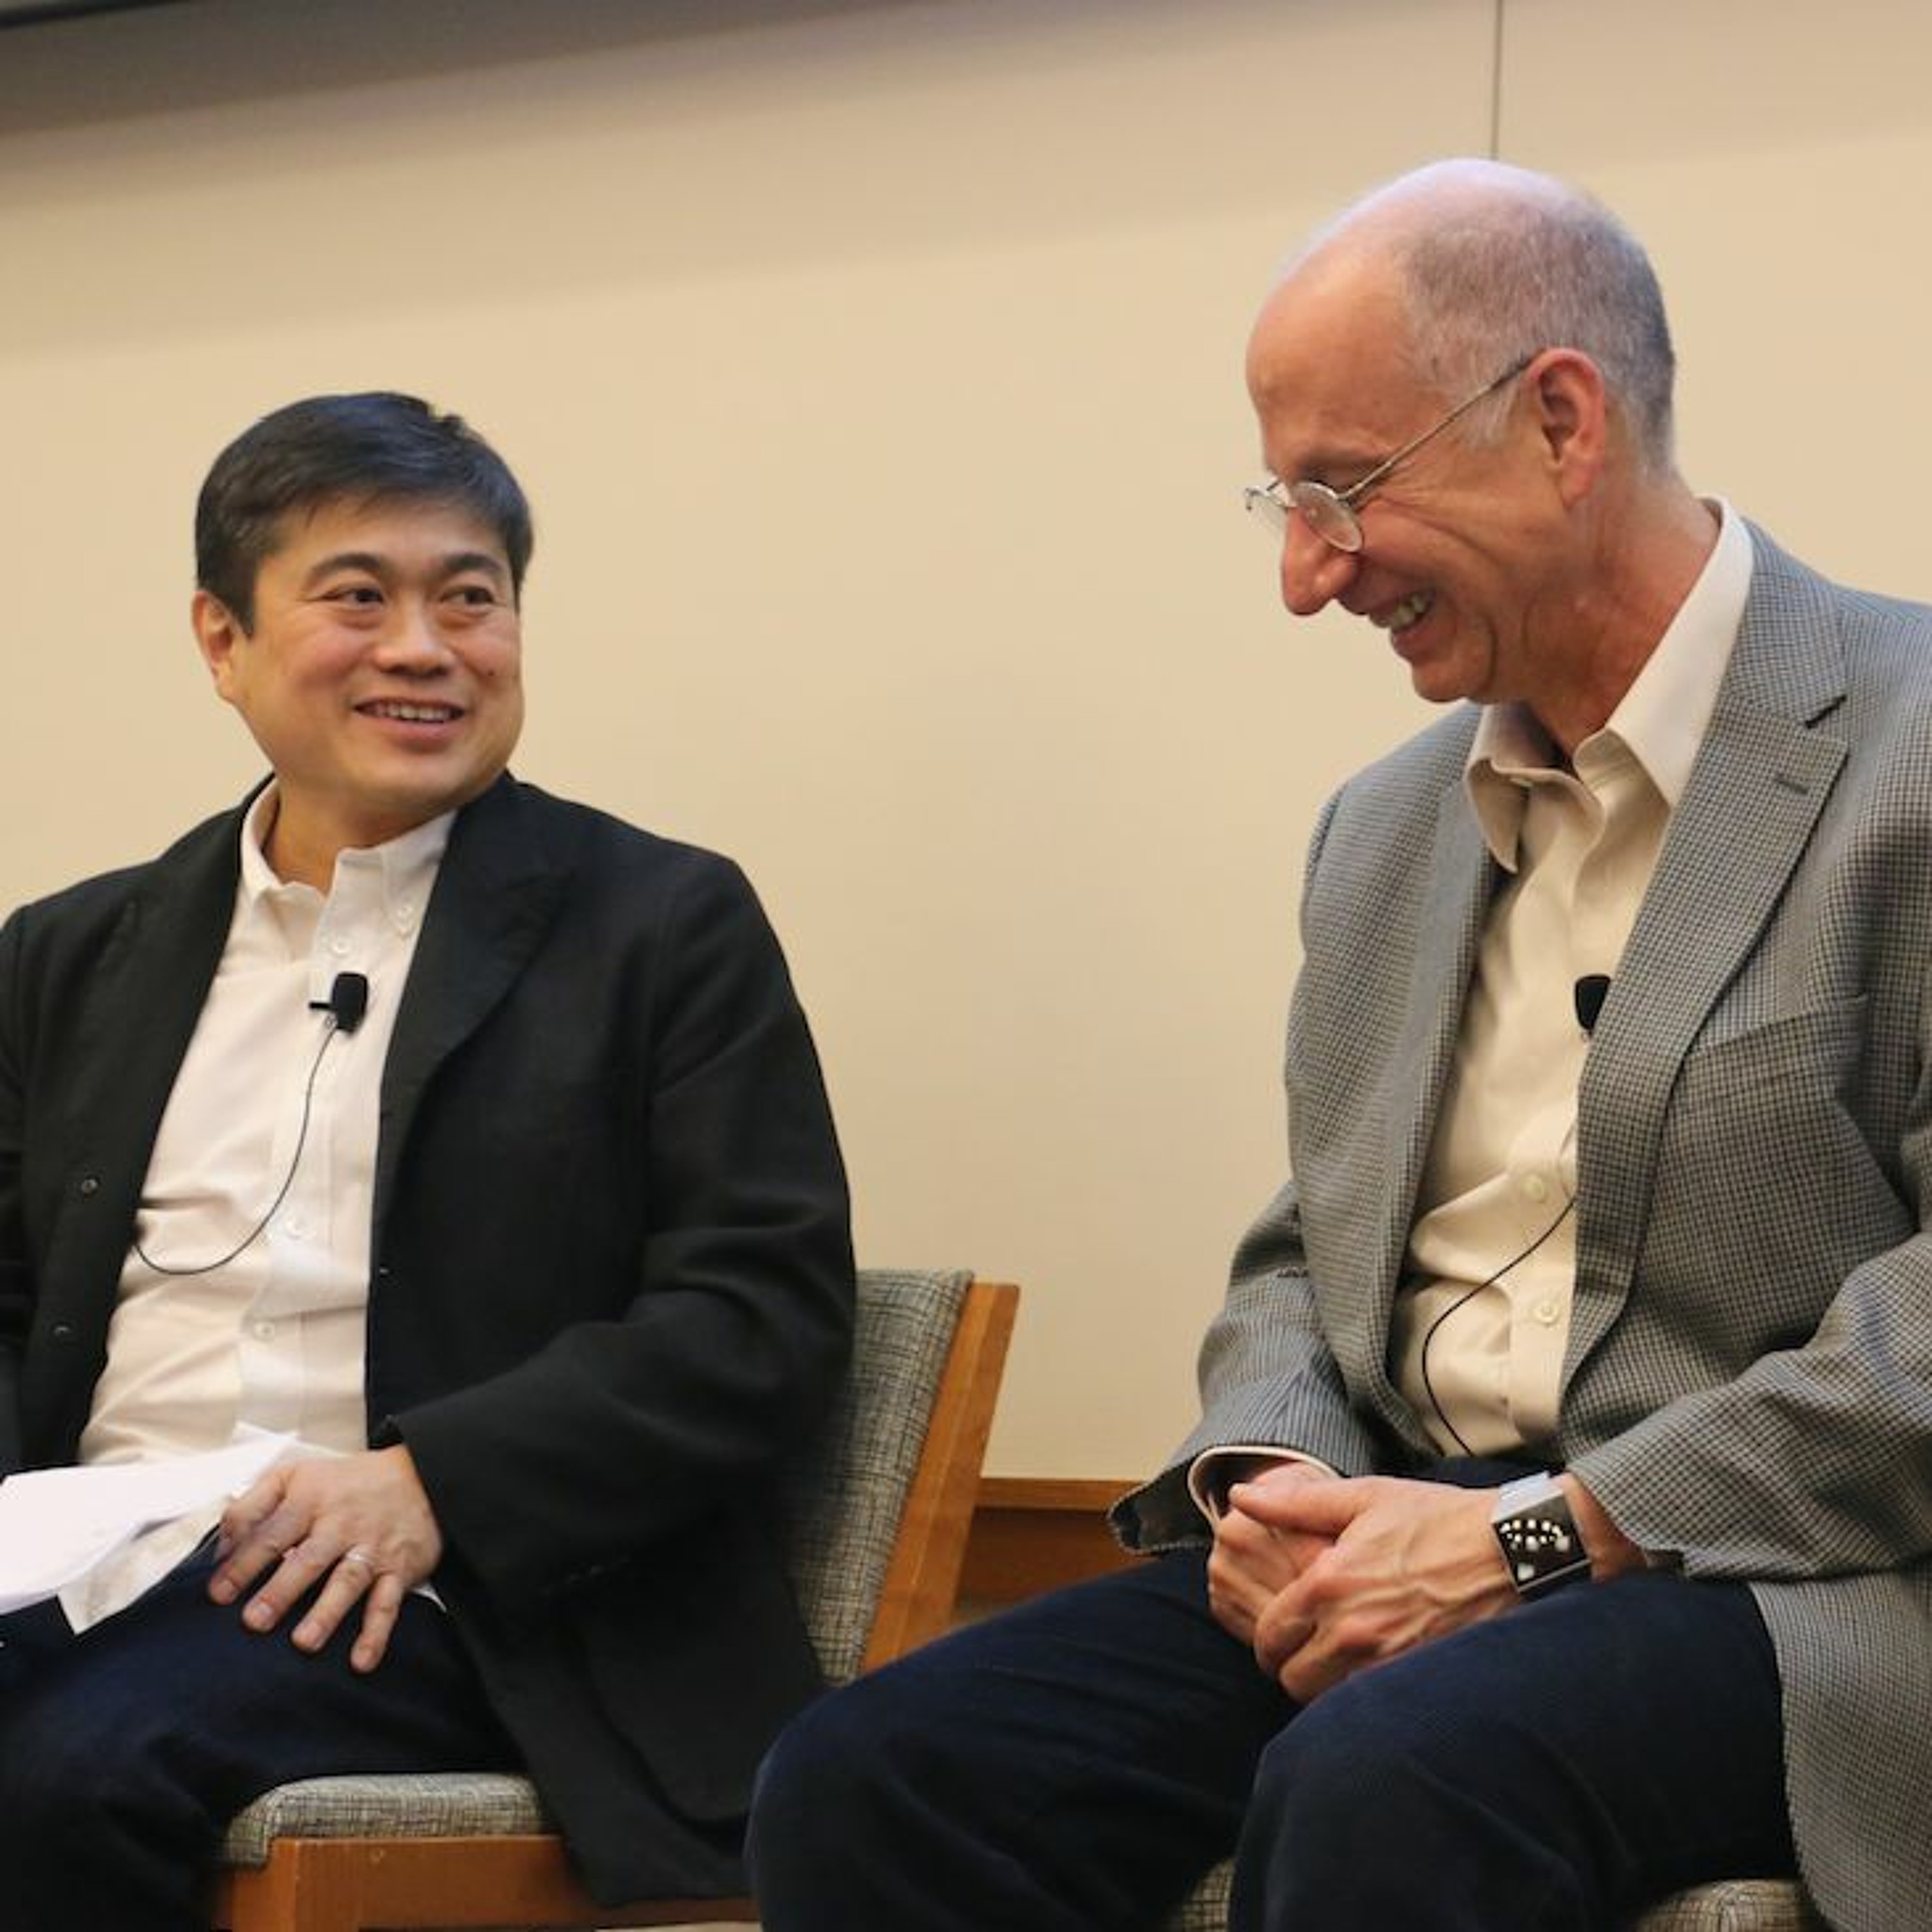 Everyday Chaos -  A Book Talk with author David Weinberger and Joi Ito